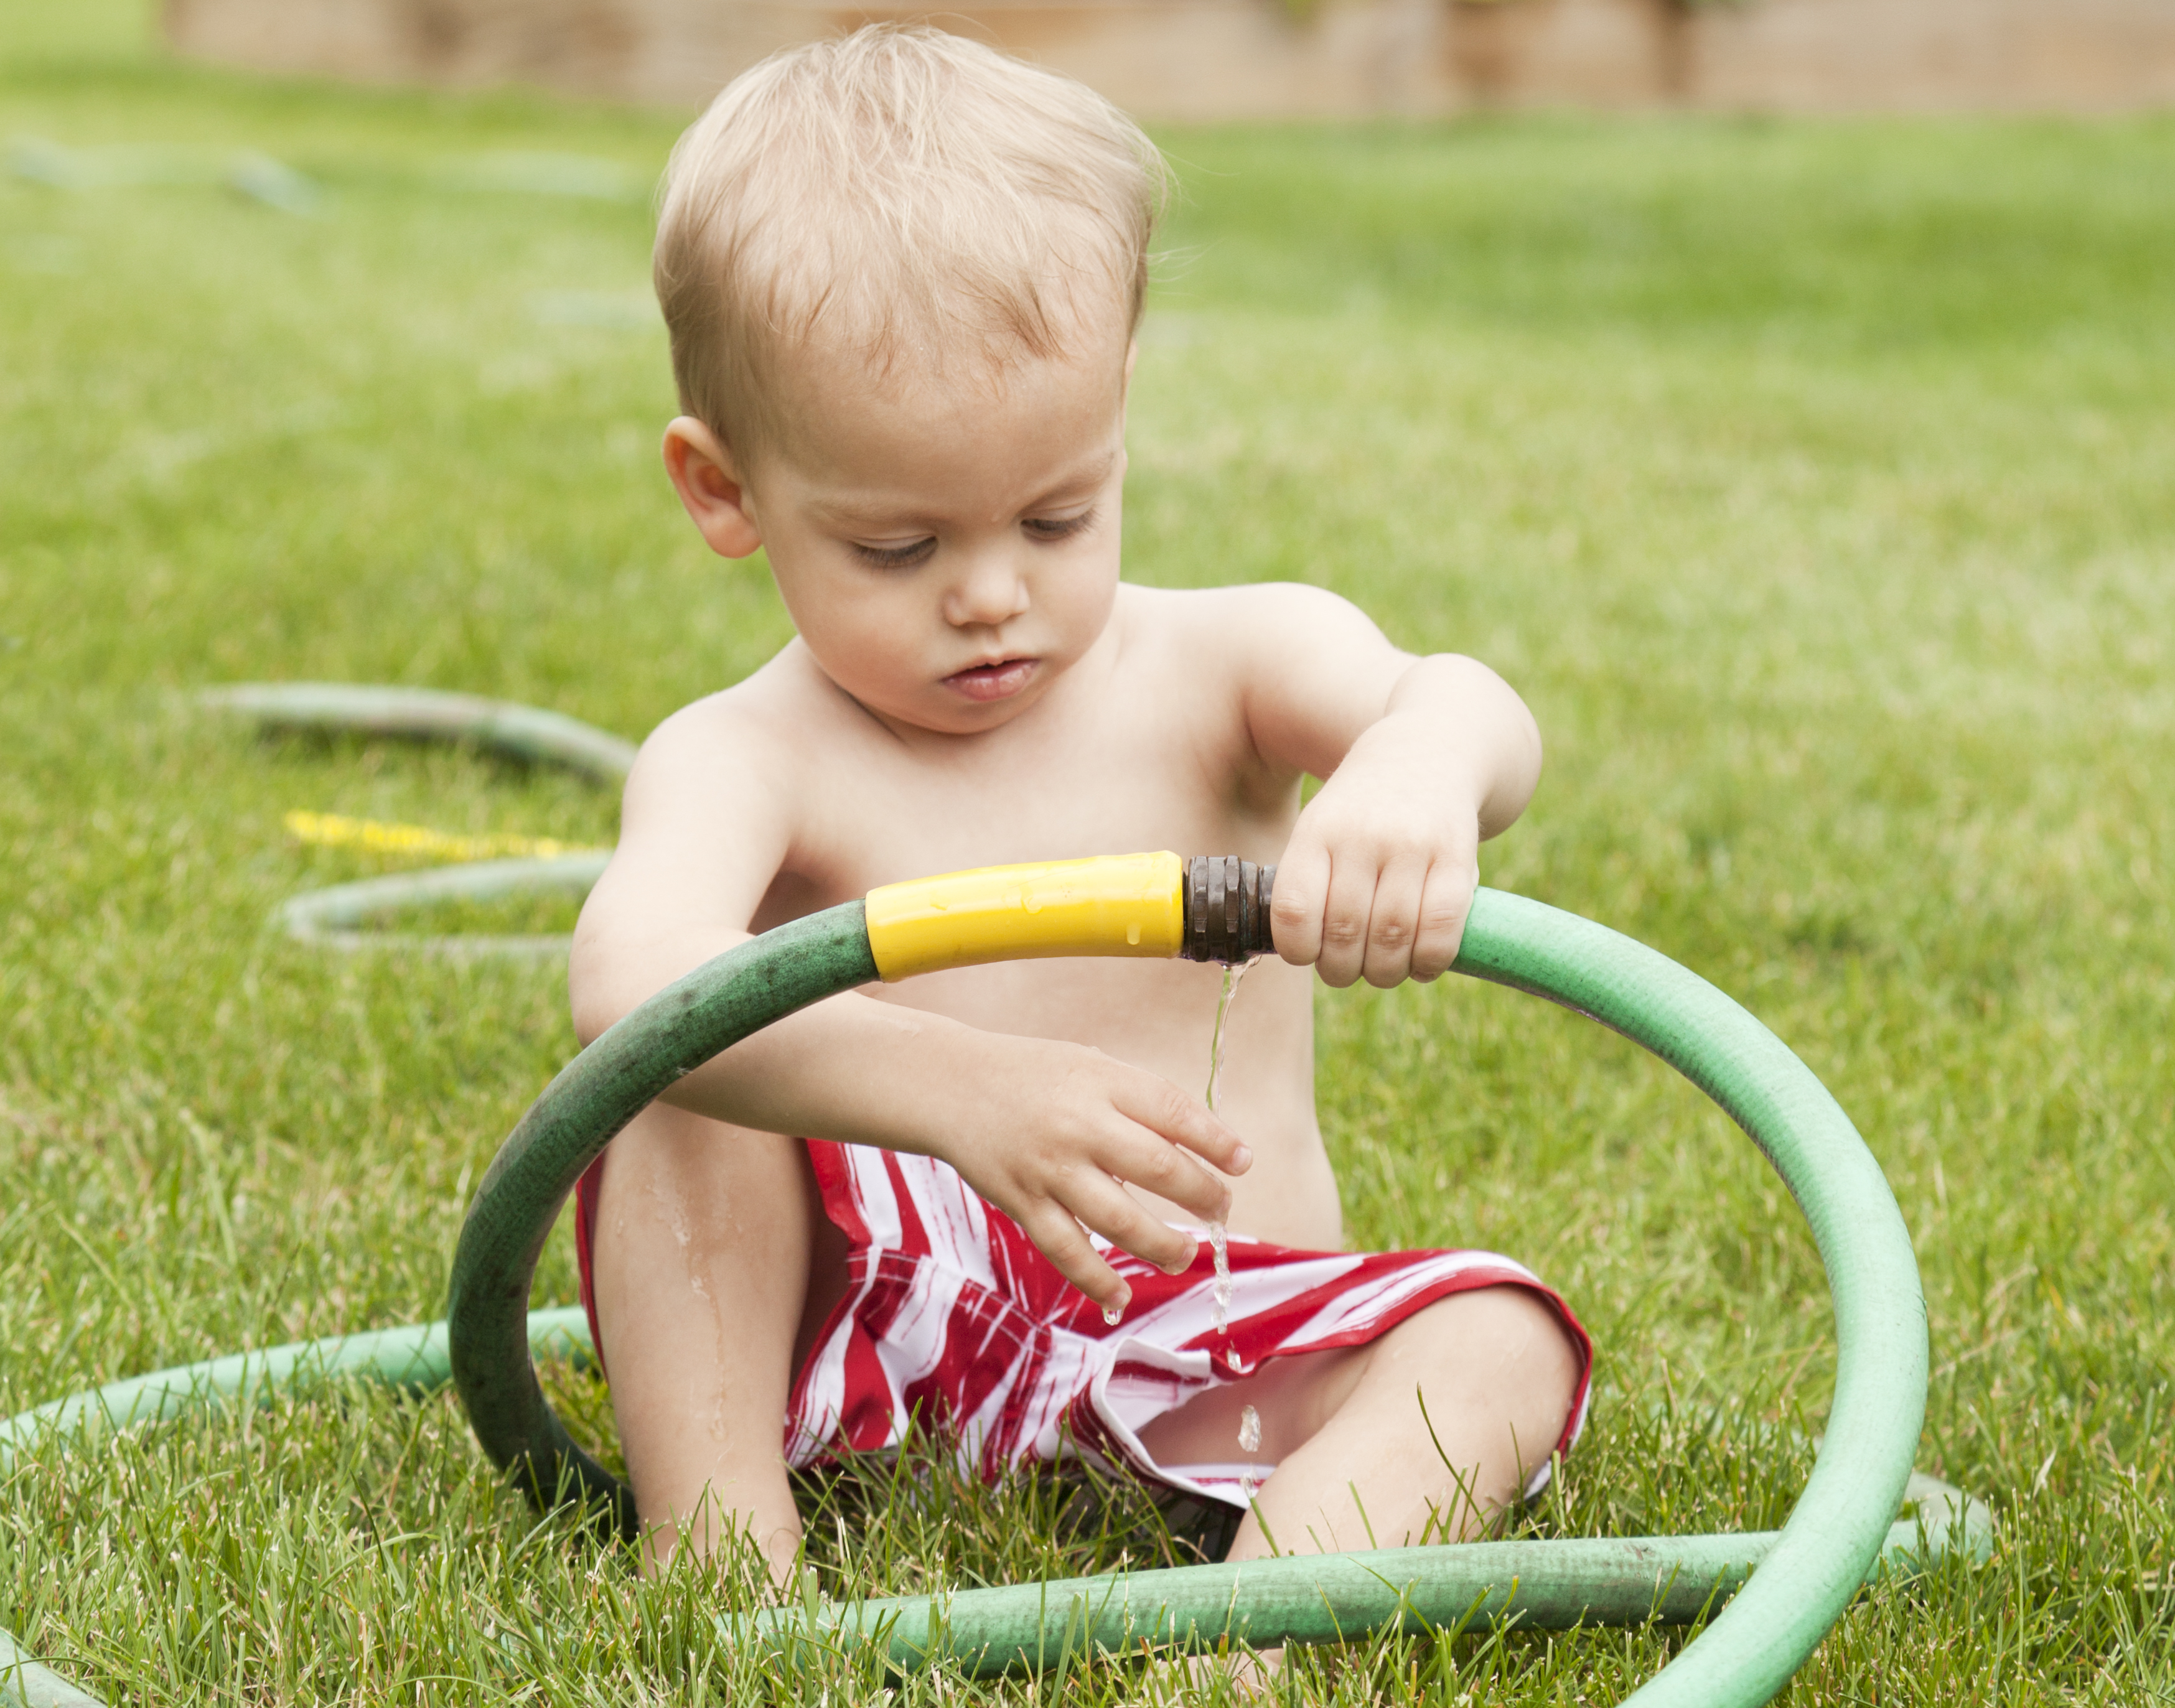 Baby plays with leaking garden hose. Young boy plays with the water dripping from a leaking garden hose. Backyard photo. He's wearing a red and white stiped bathing suit is very intent on grabbing the water. Focus is on the dripping water. Short DOF.